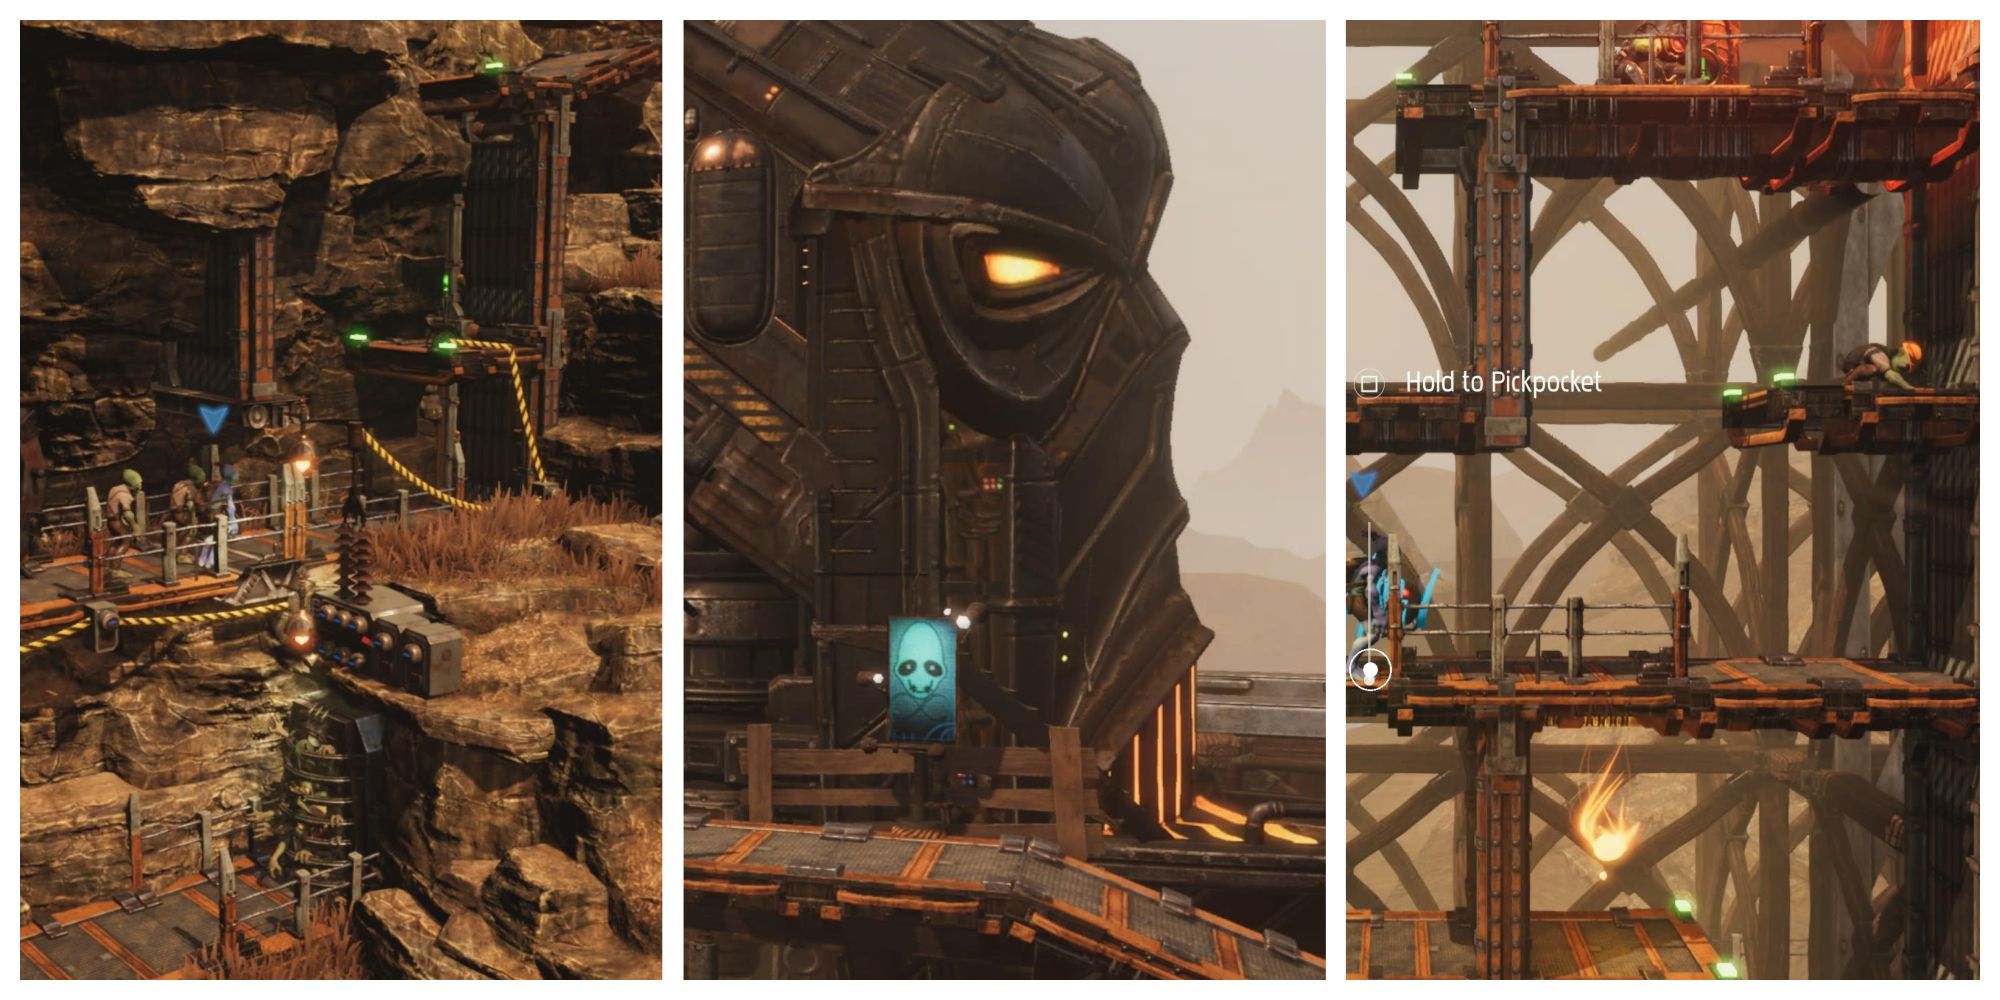 Reunion at the Old Trellis stage in Oddworld Soulstorm